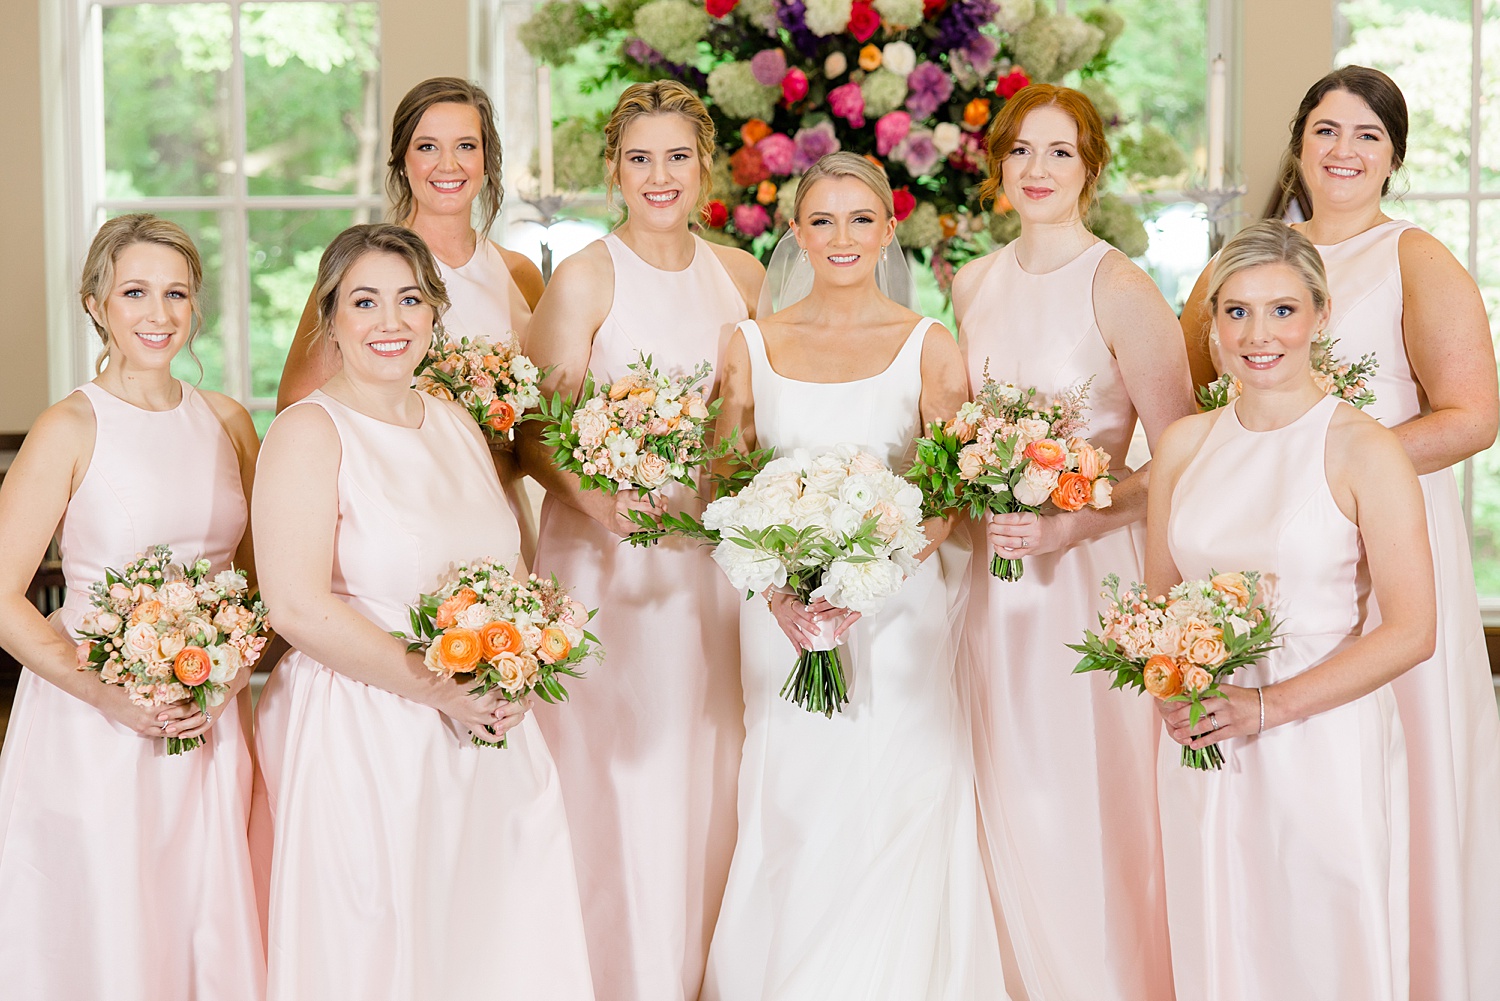 bride and bridesmaids at church before ceremony